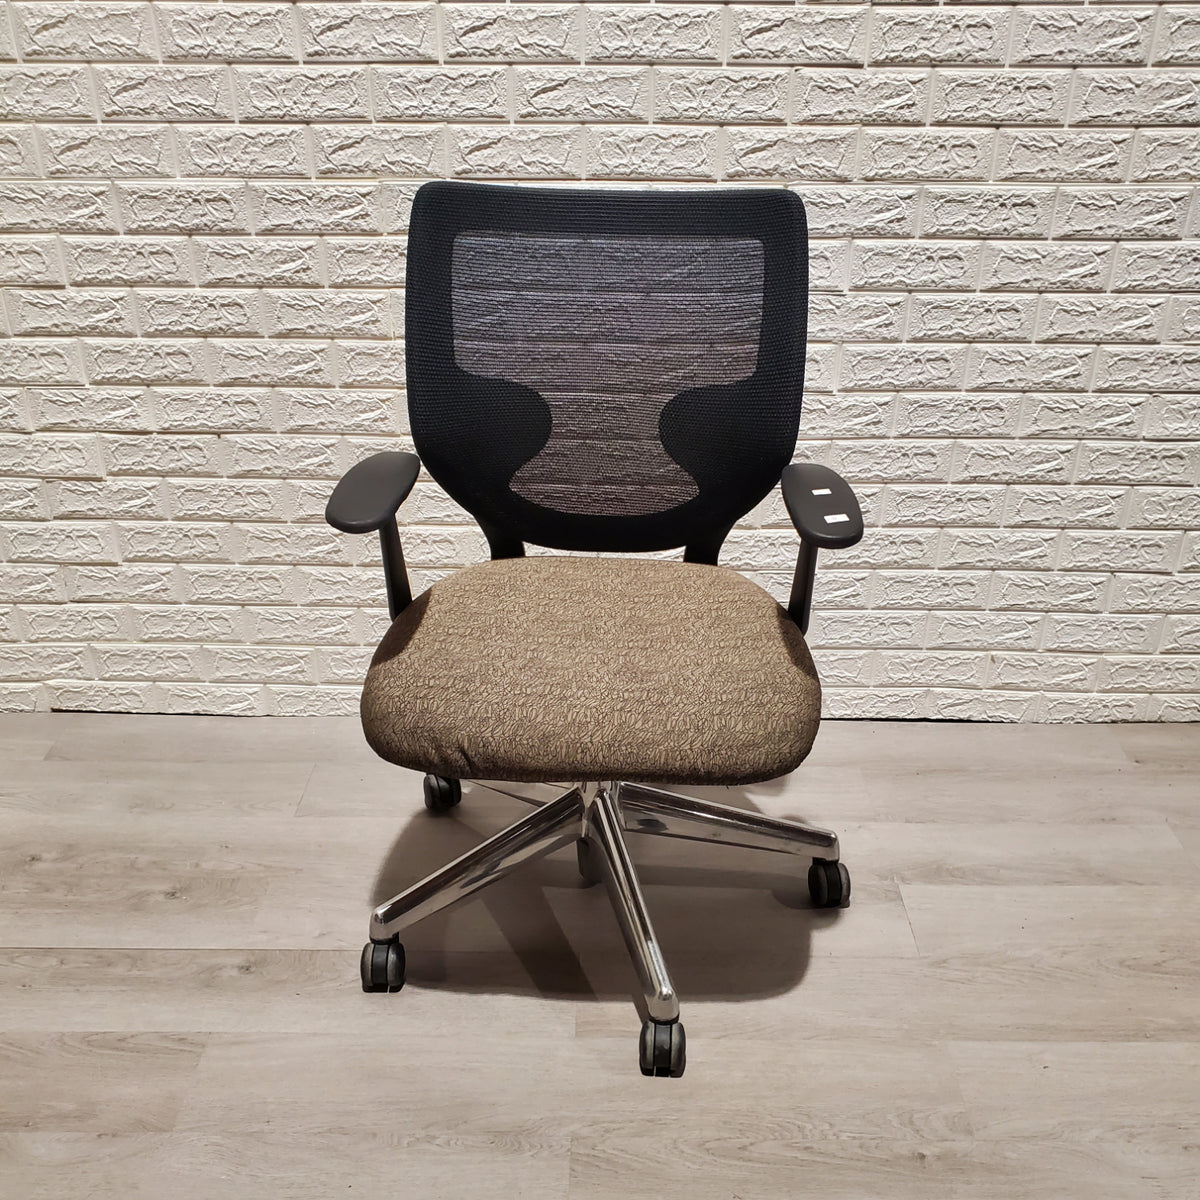 Used Tan and Black Task Chair - Duckys Office Furniture